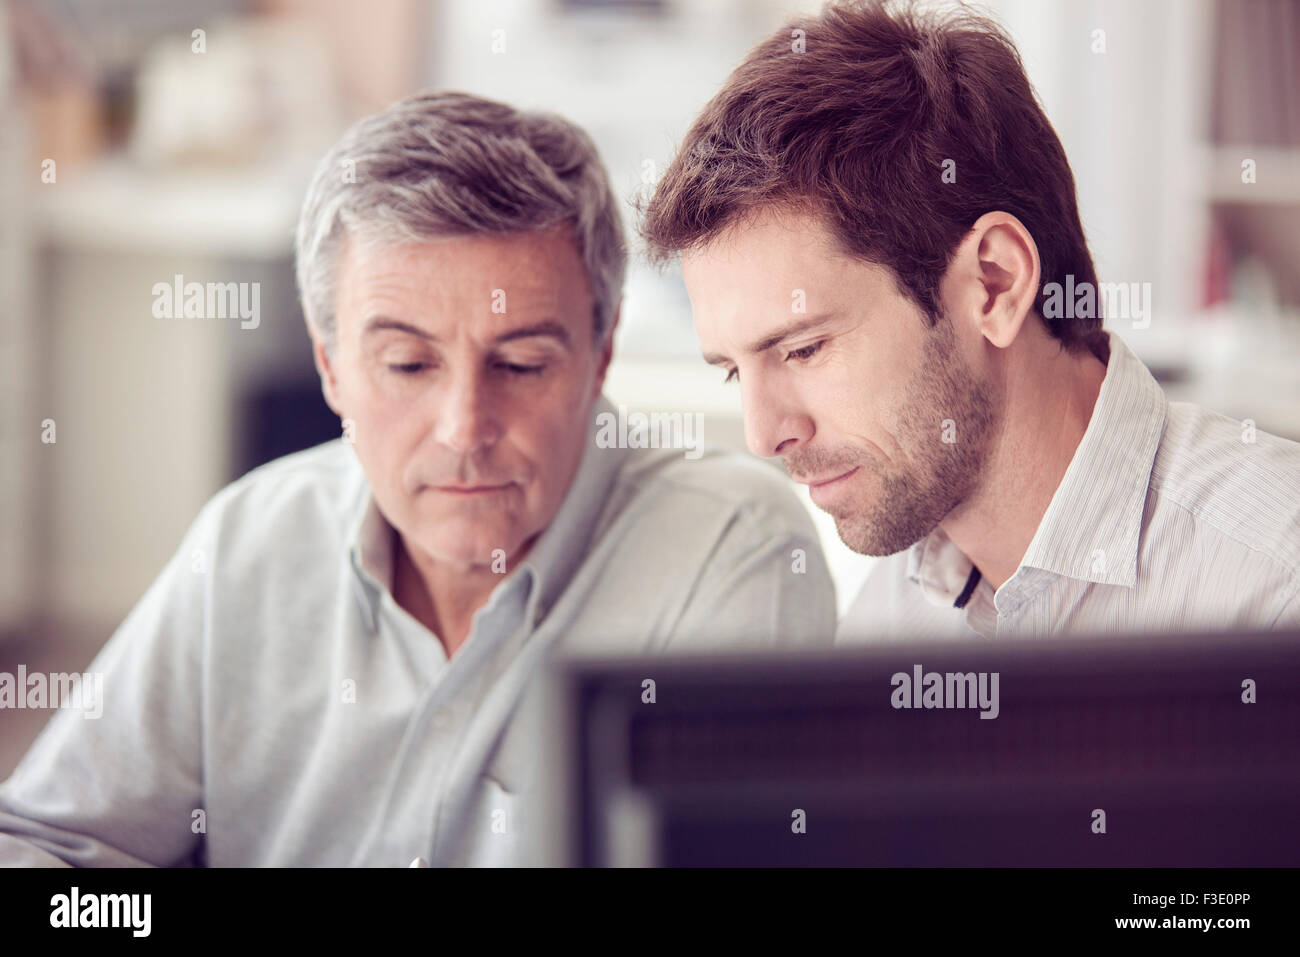 Colleagues working together Stock Photo